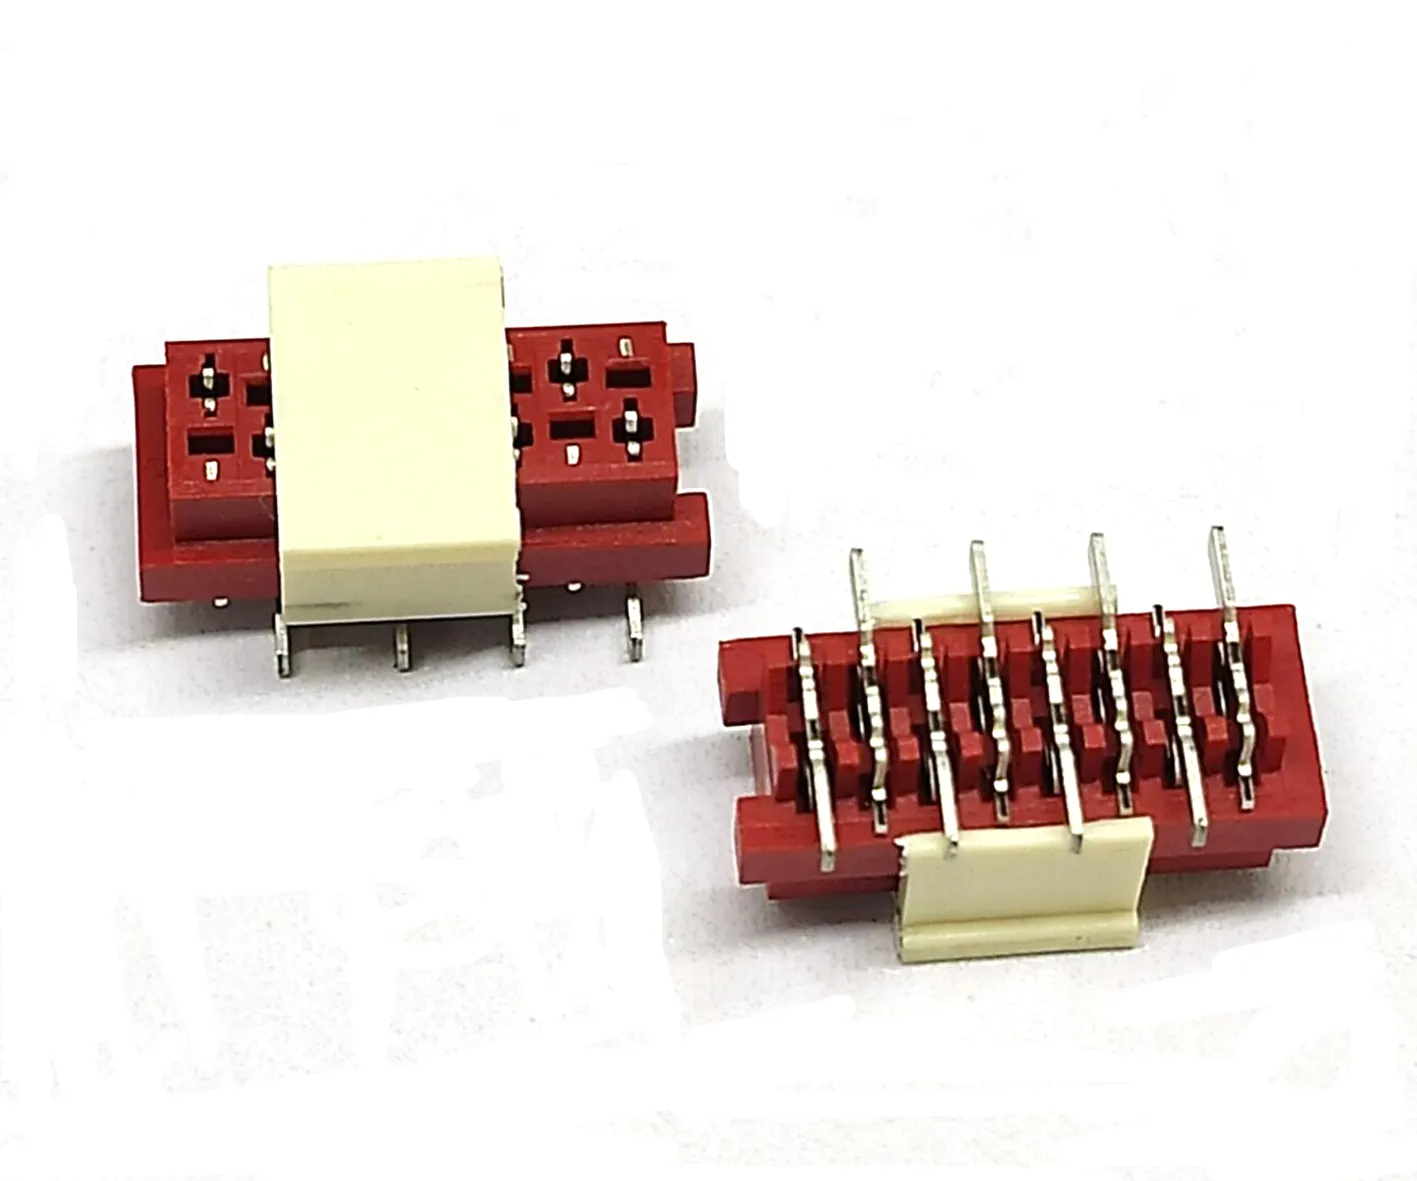 Pcb receptacle board to board 2.54mm pitch 2 rows 14 contacts surface mount TE alternative 188275 connectors